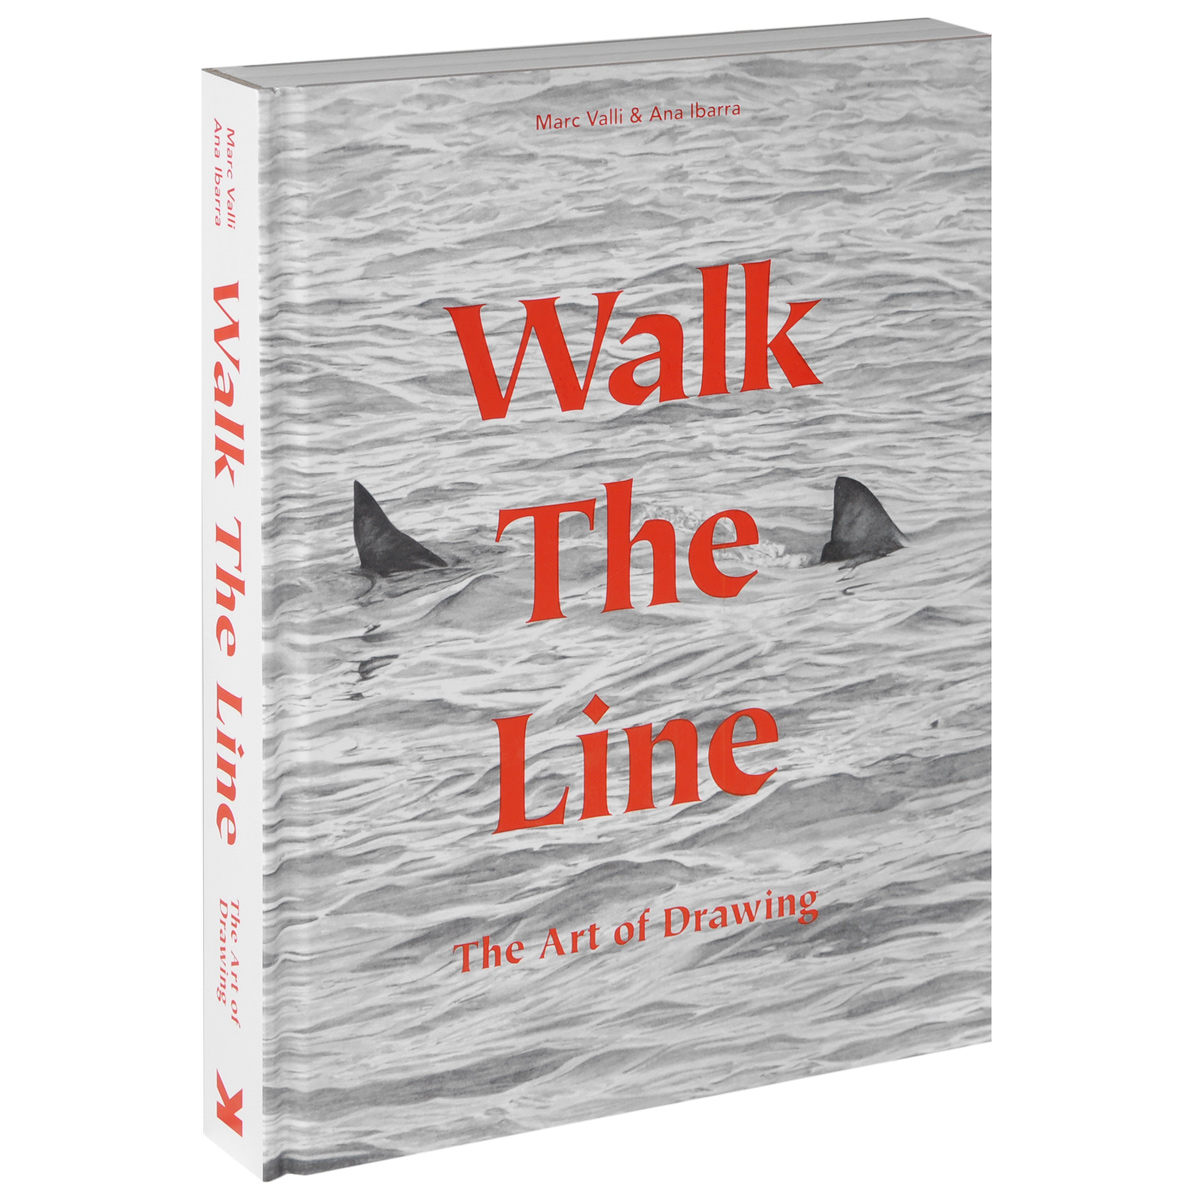 Walk the Line: The Art of Drawing